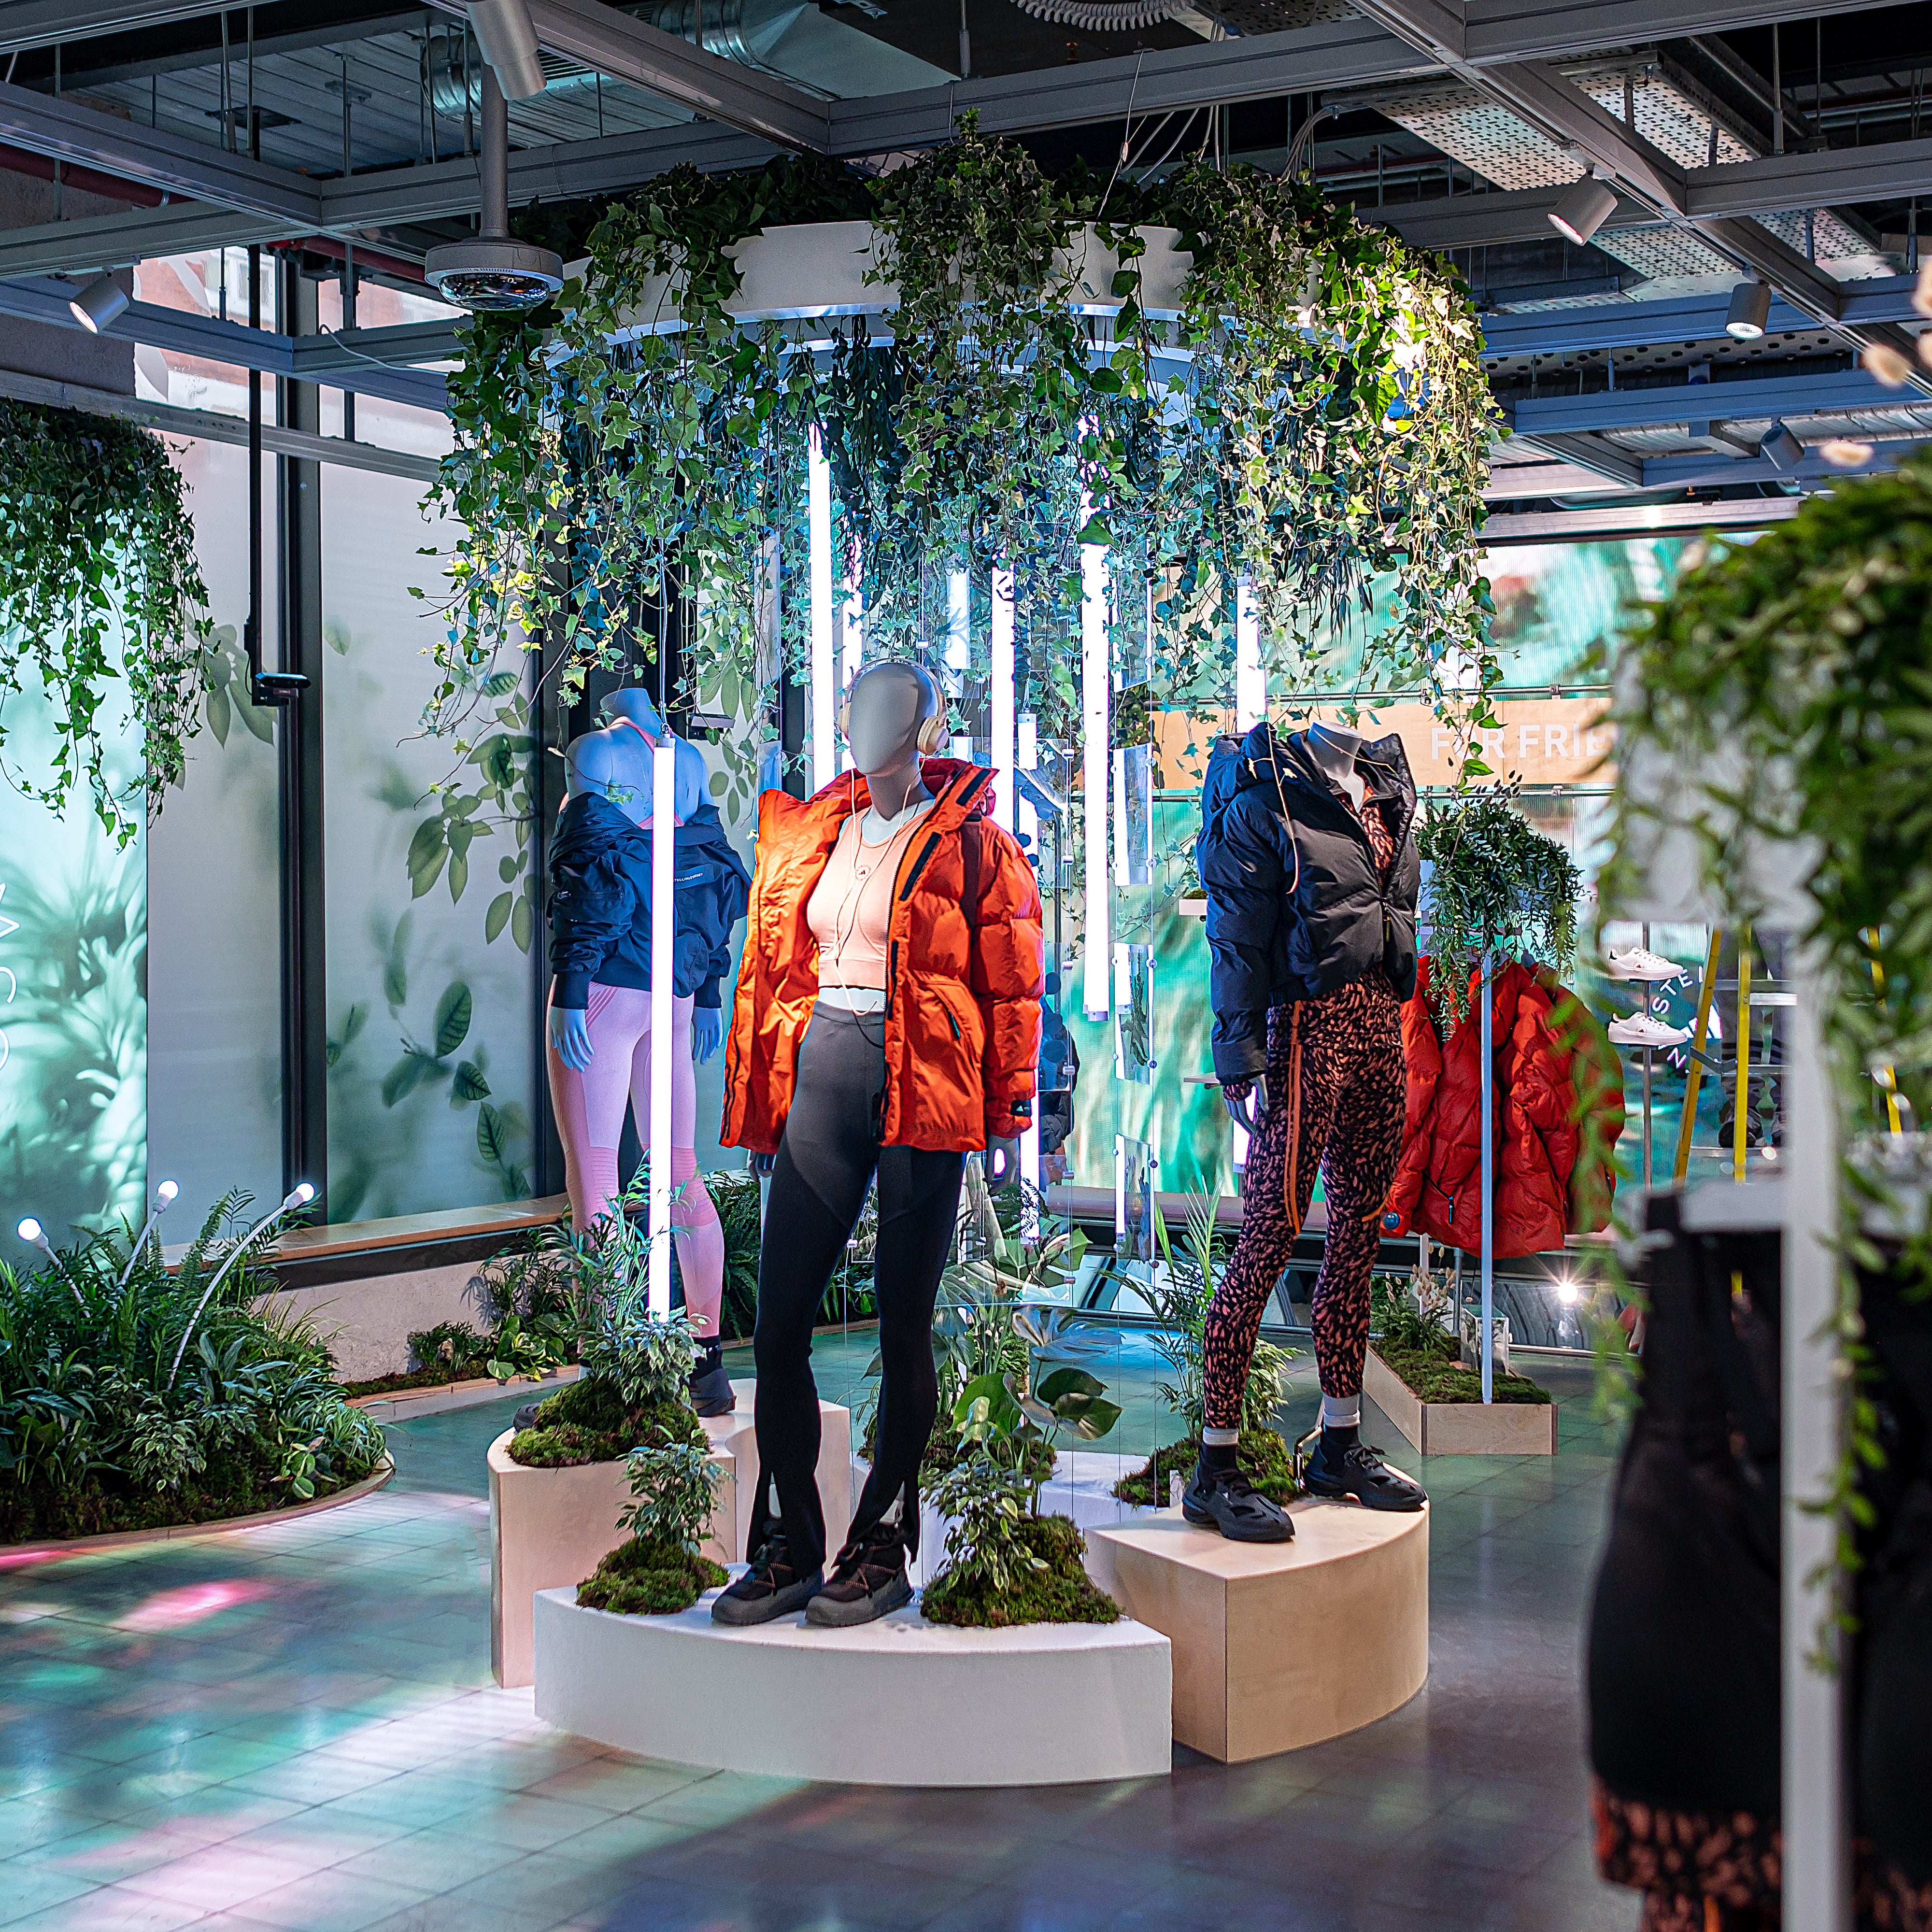 Bespoke Floral Installation for Adidas London store, plant installations by Amaranté London.